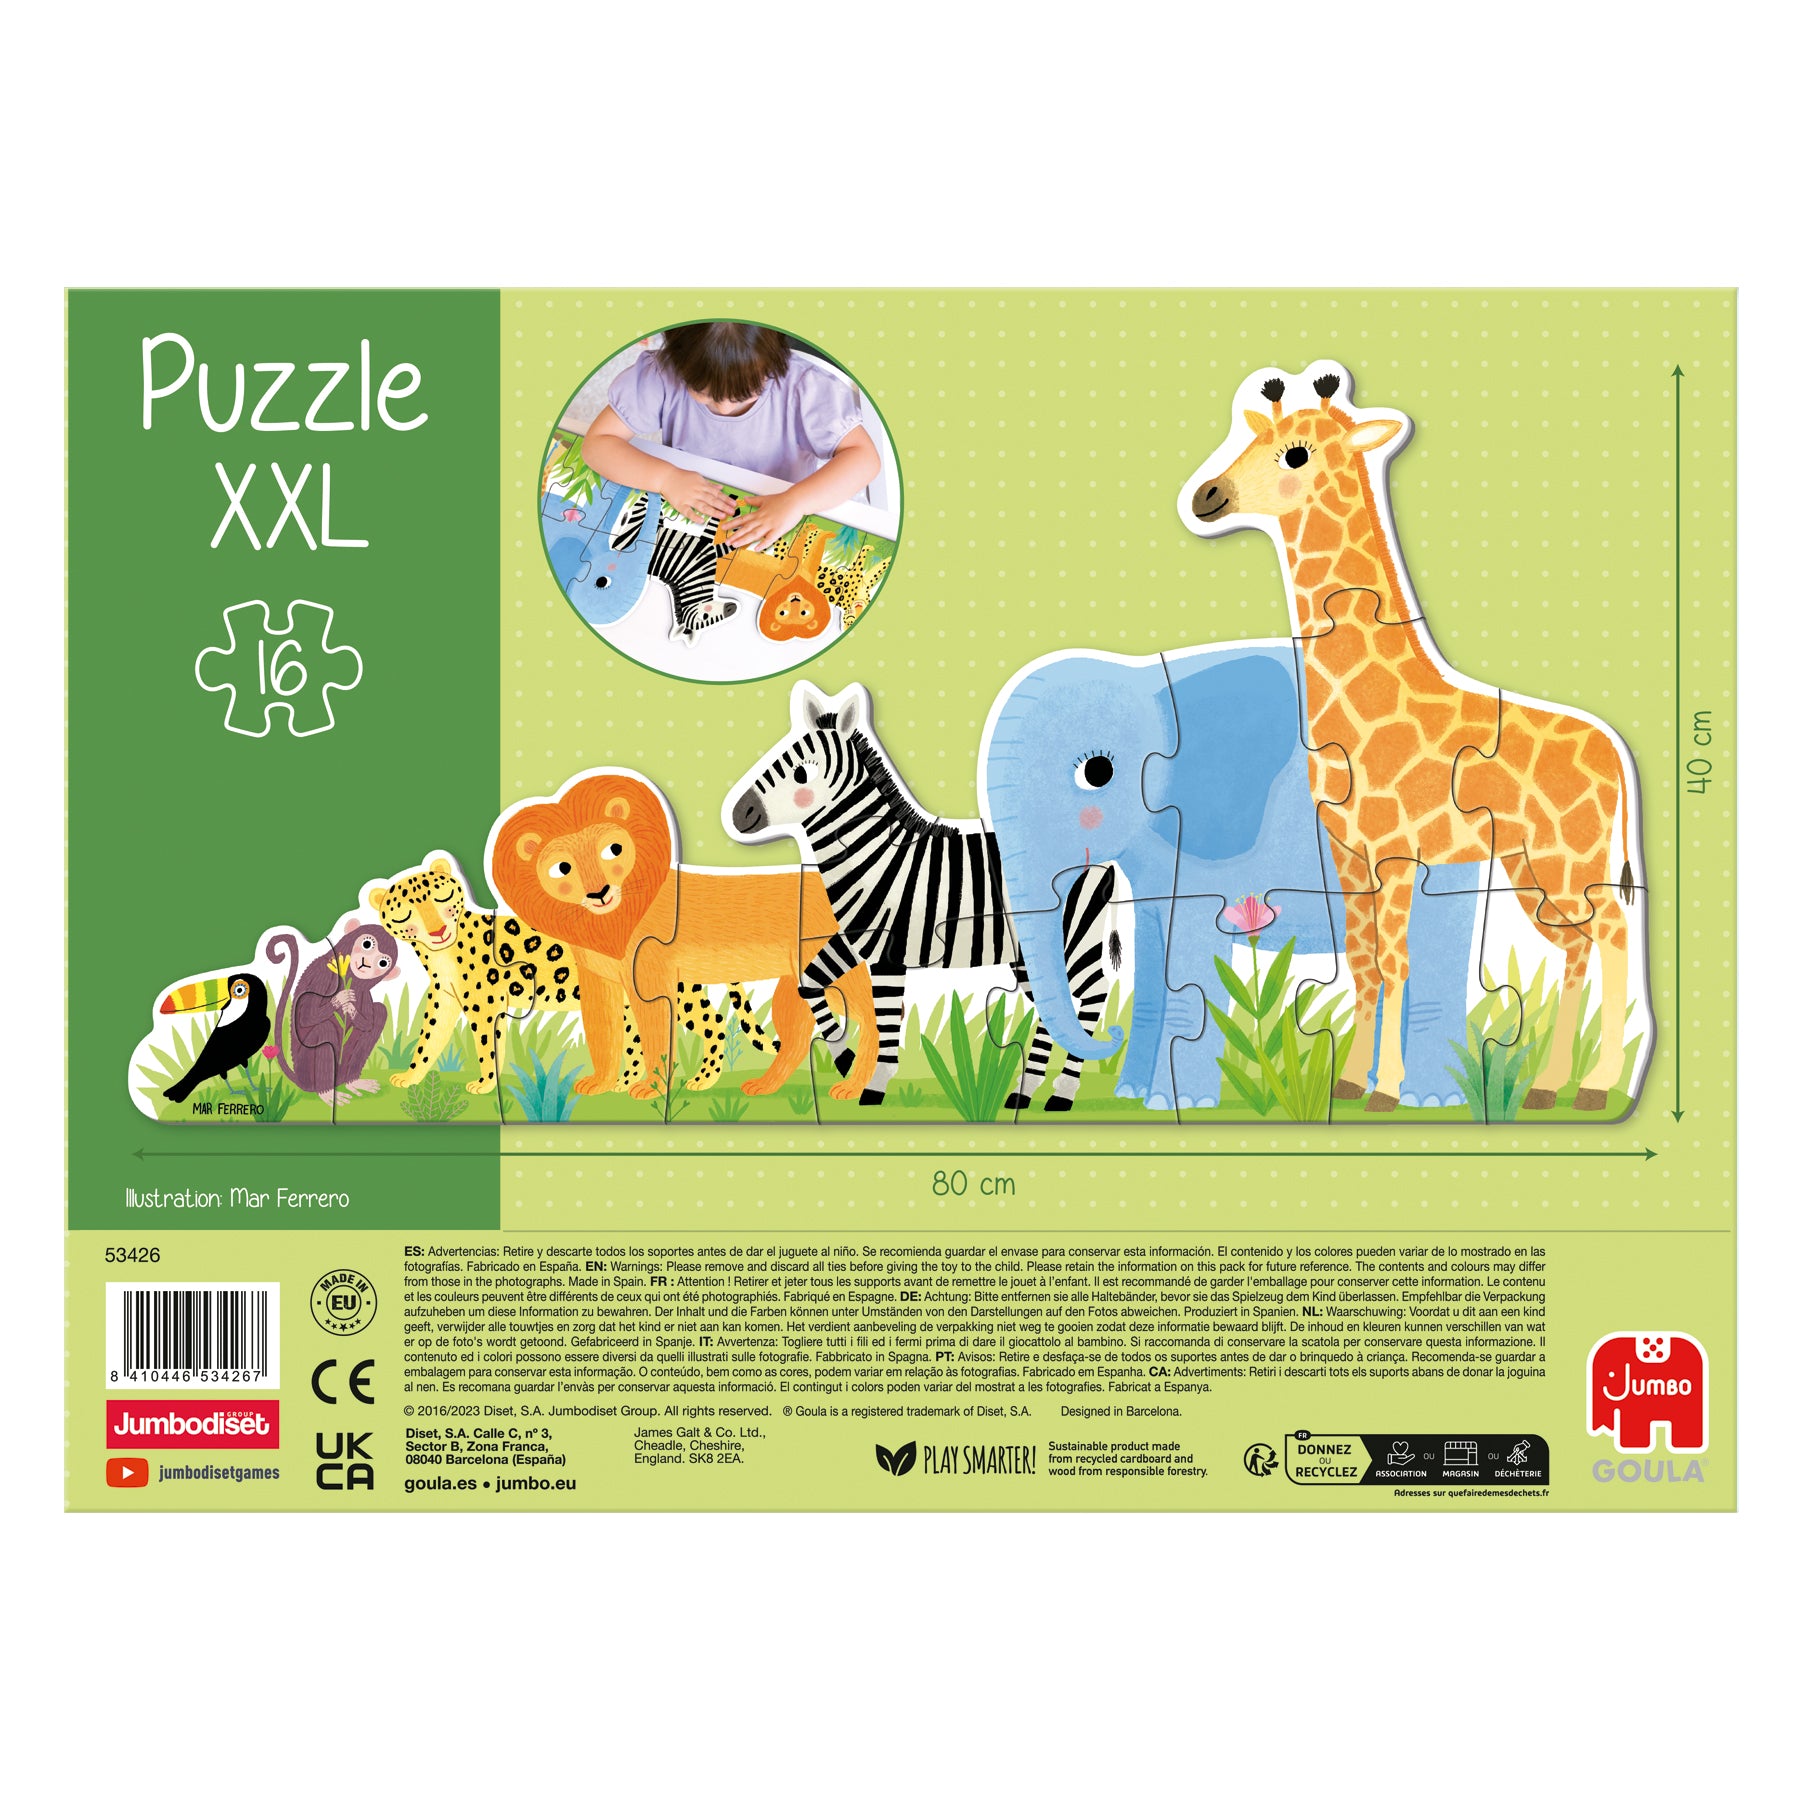 Puzzle XXL Jungle from small to large - product image - Jumboplay.com